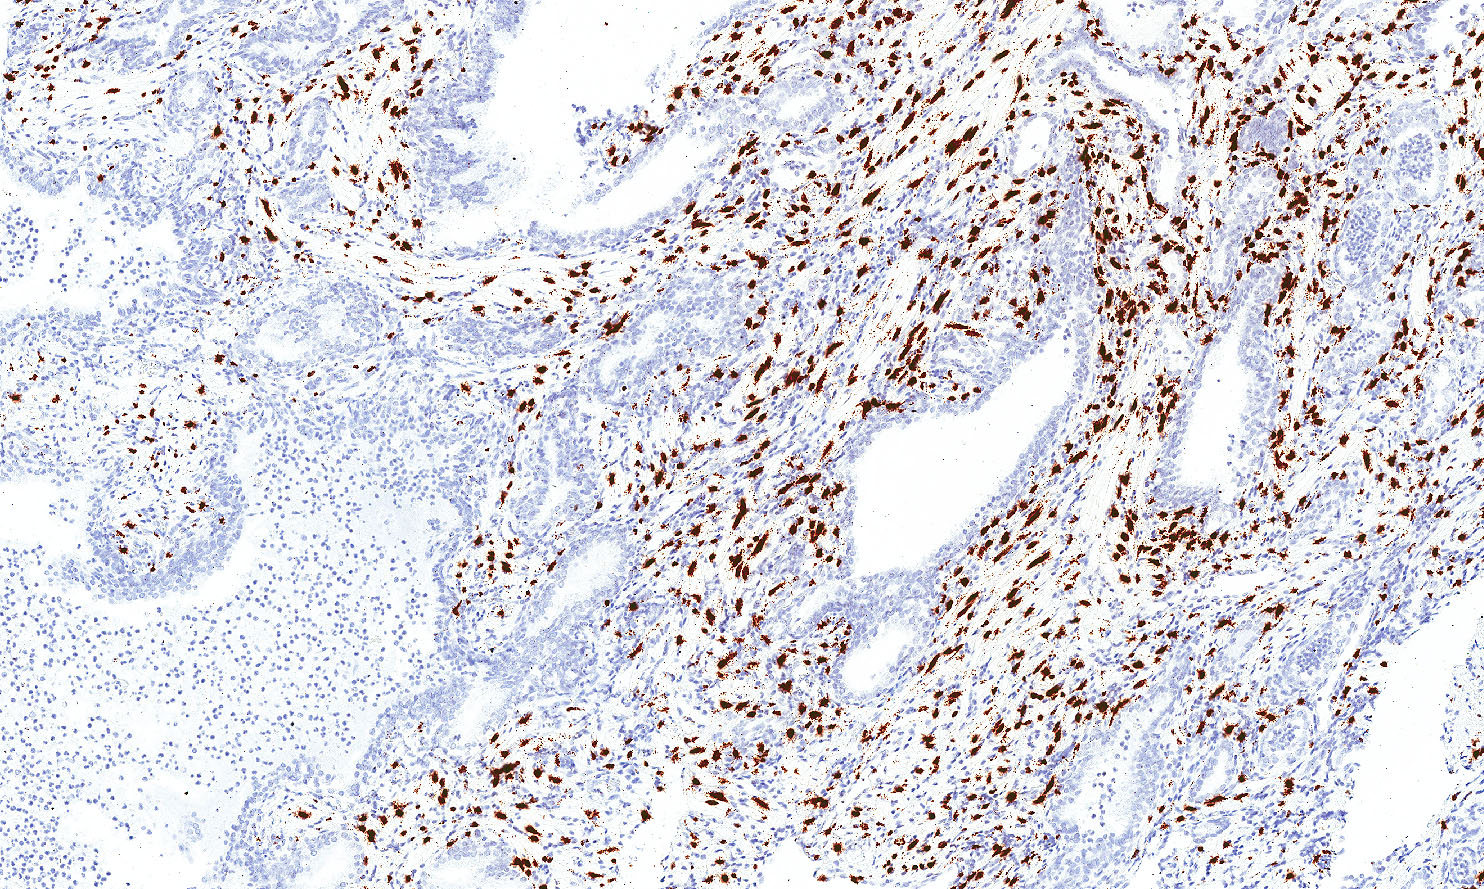 IL-6 mRNA-expressing cells (brown staining) are highly enriched in the stroma in areas of acute inflammation in the prostate.